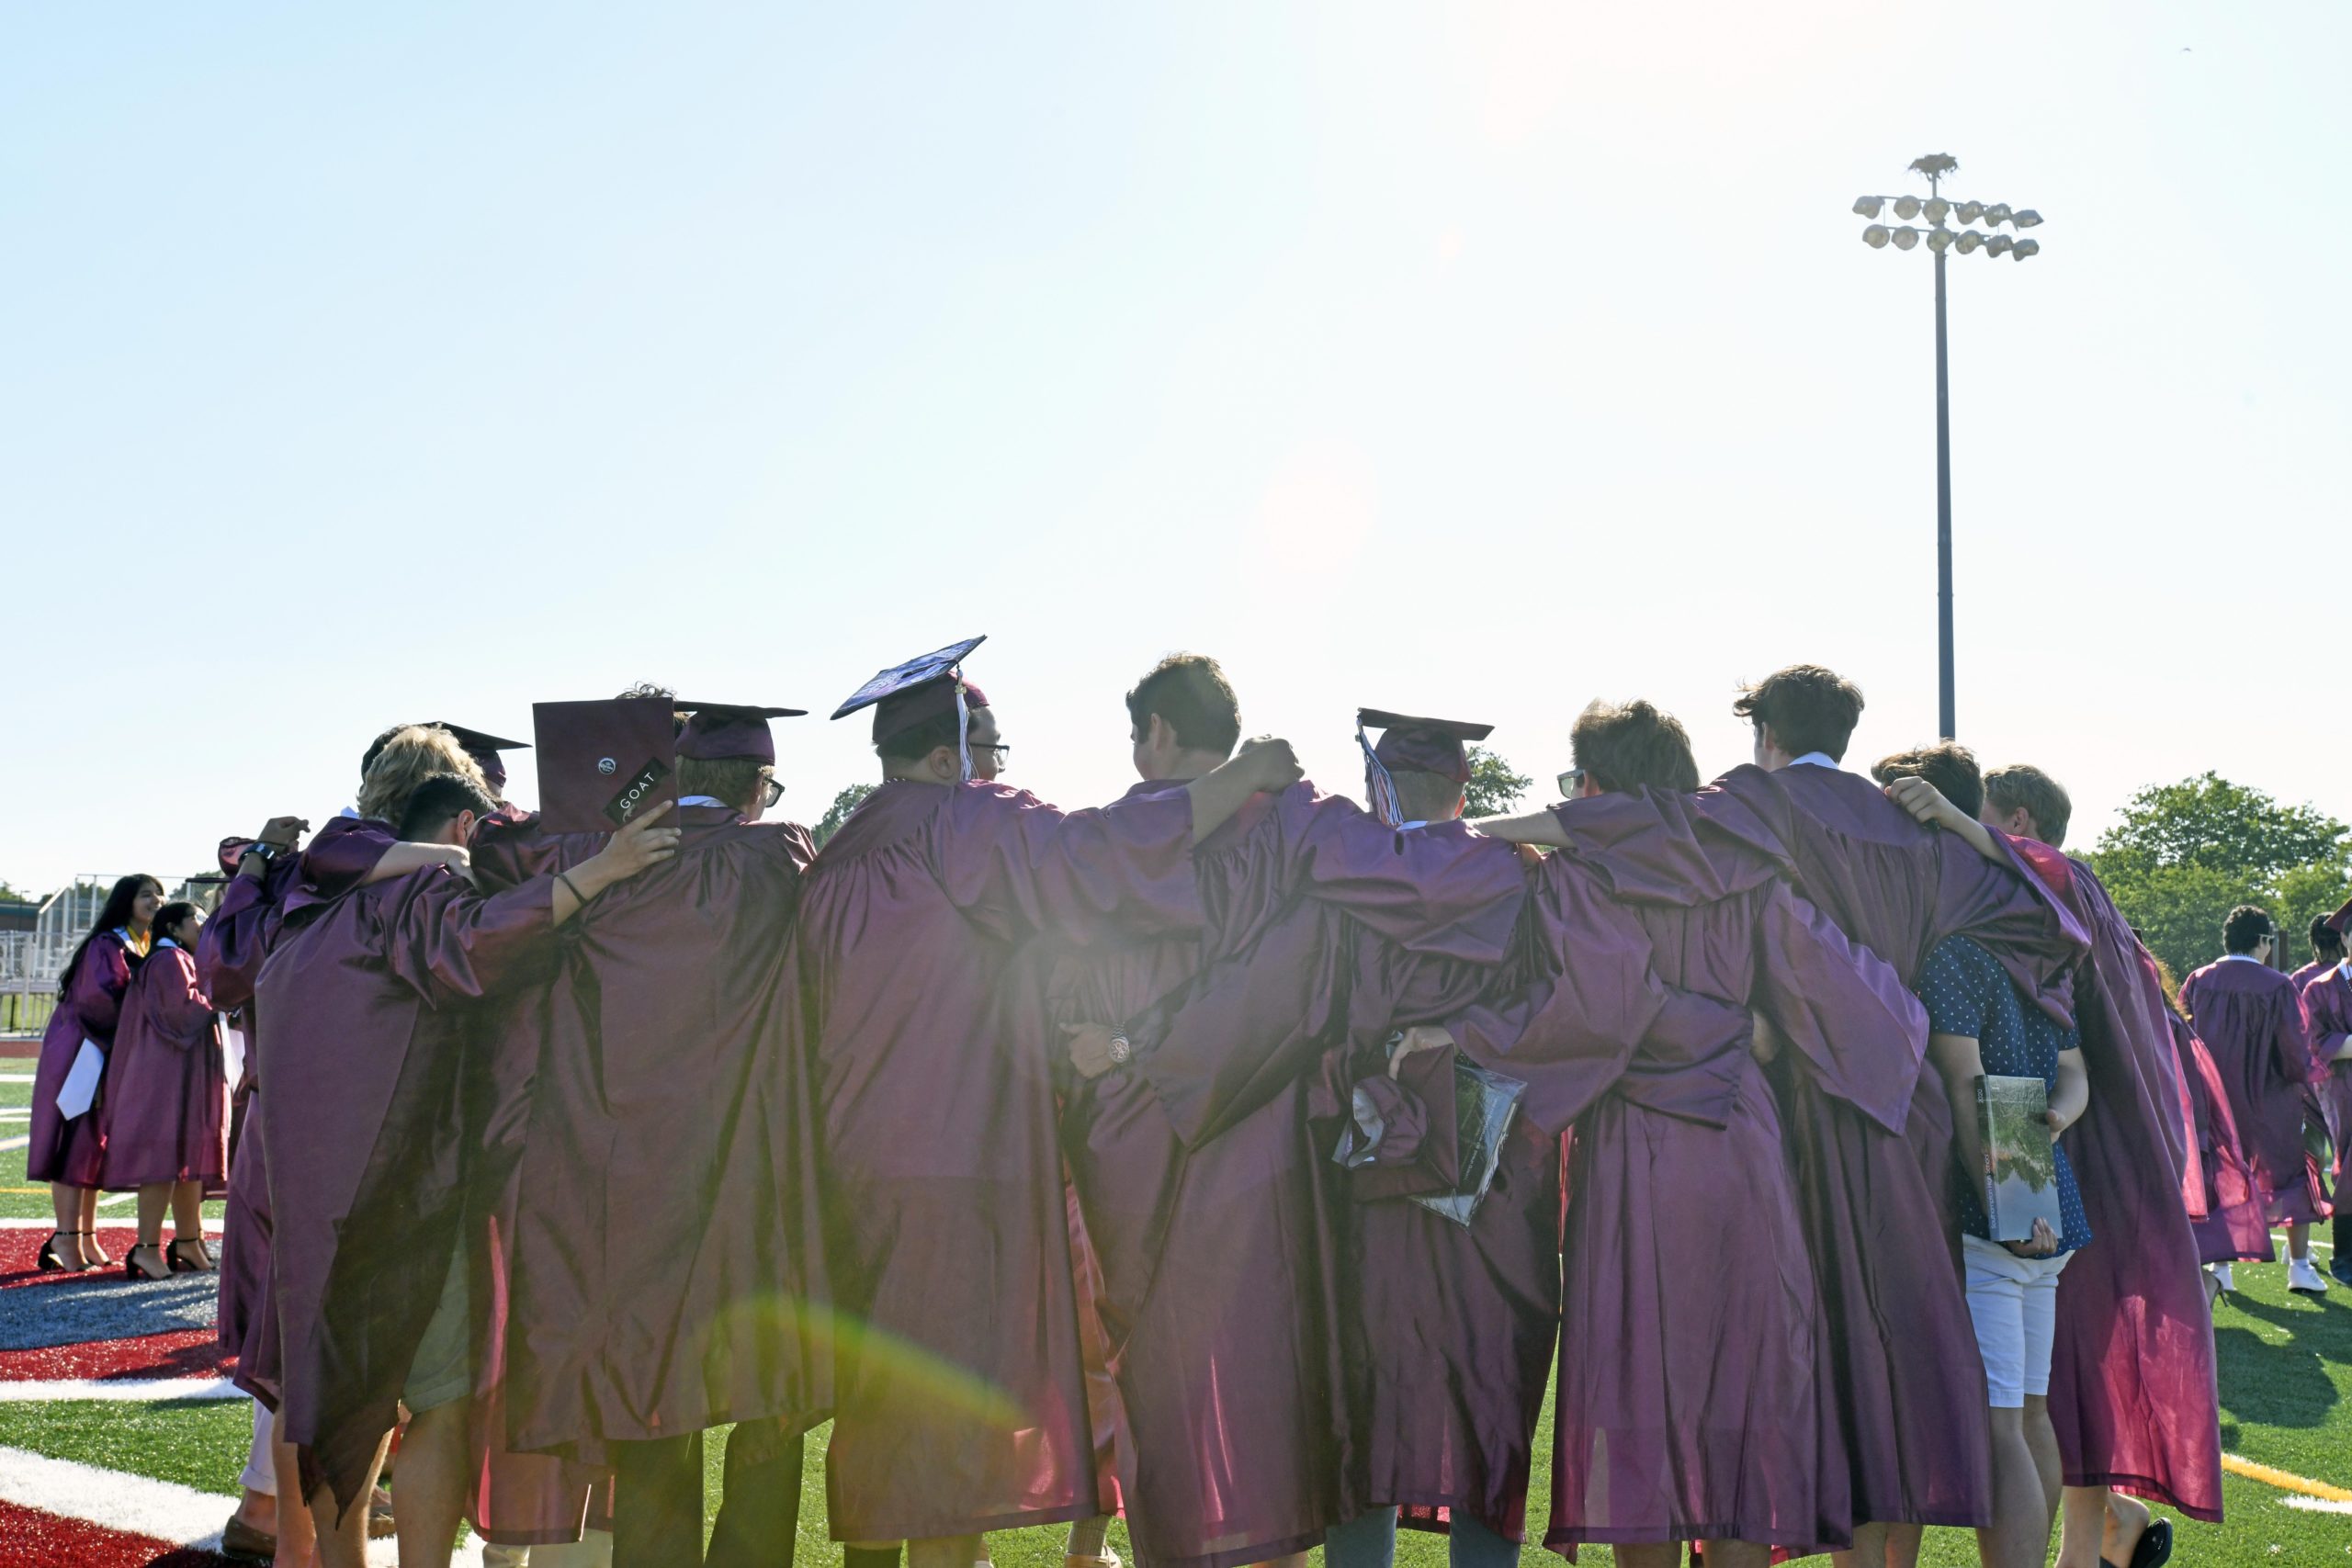 Southampton High School's unique 127th commencement was held on Friday.